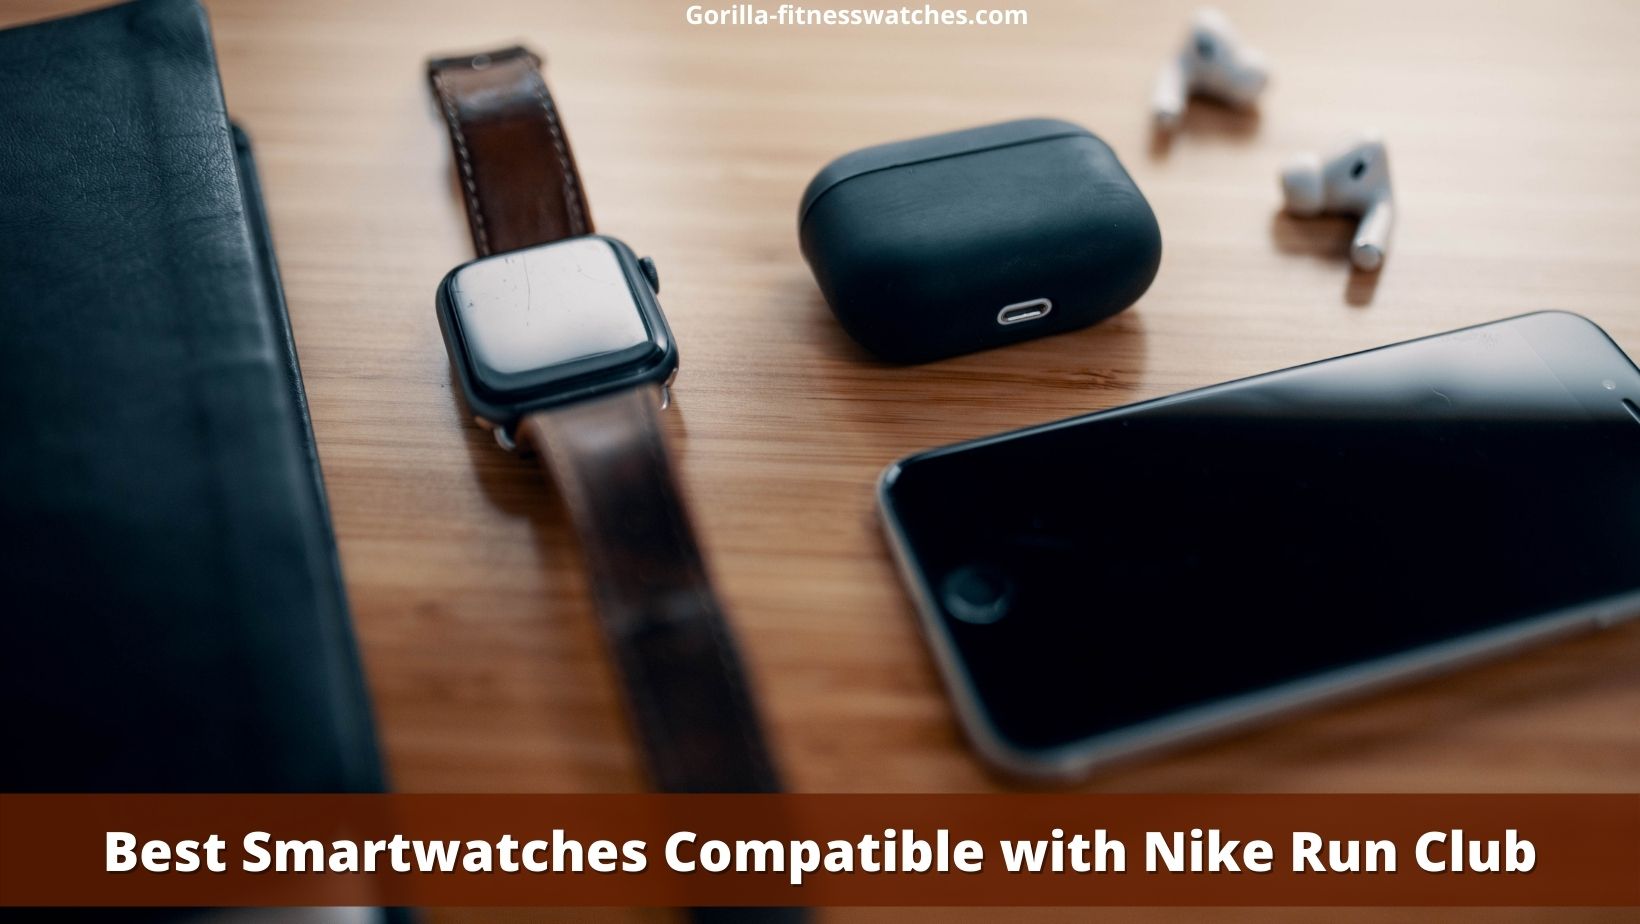 Smartwatches Compatible with Nike Run Club